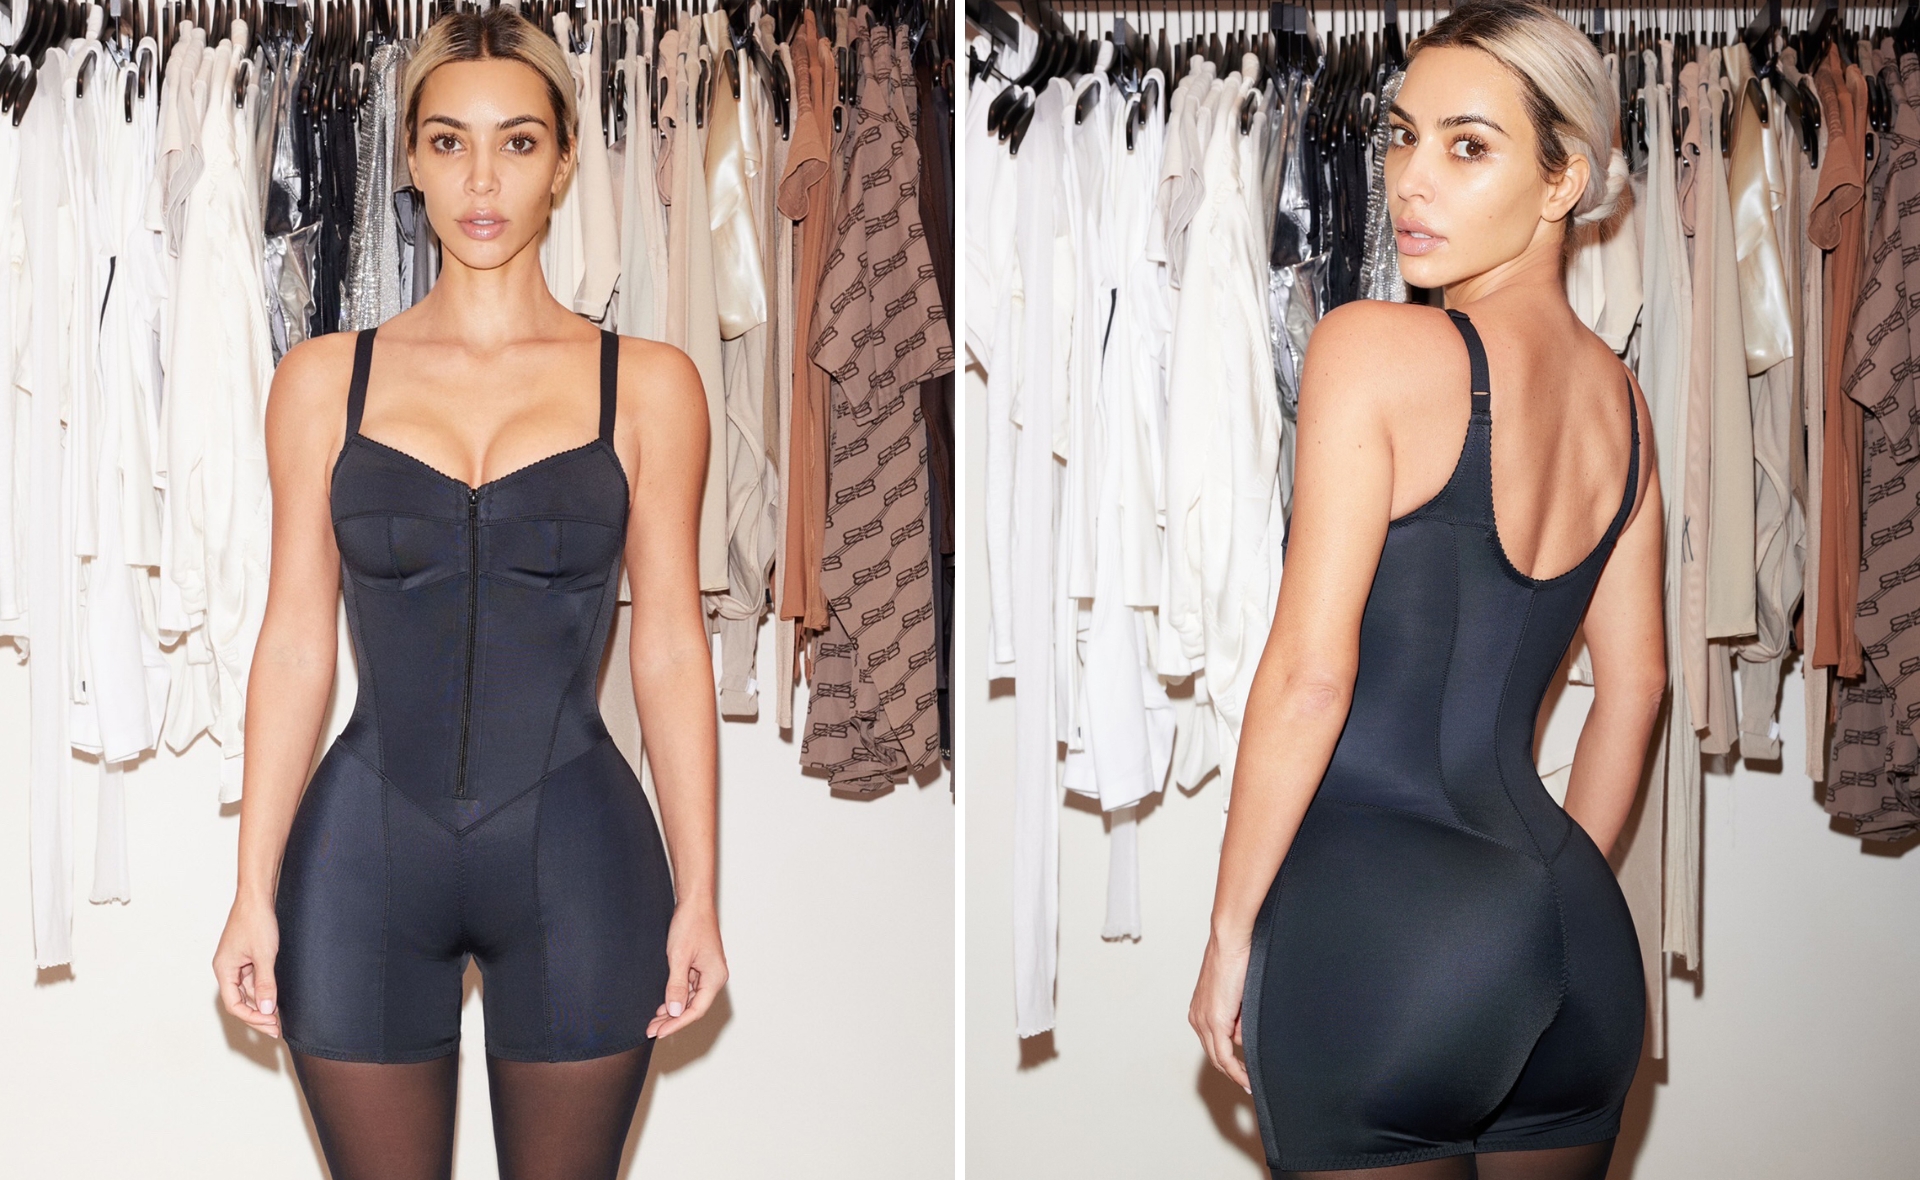 PUMIEY Shapewear bodysuit review! Obsessed with everything this brand, Bodysuit